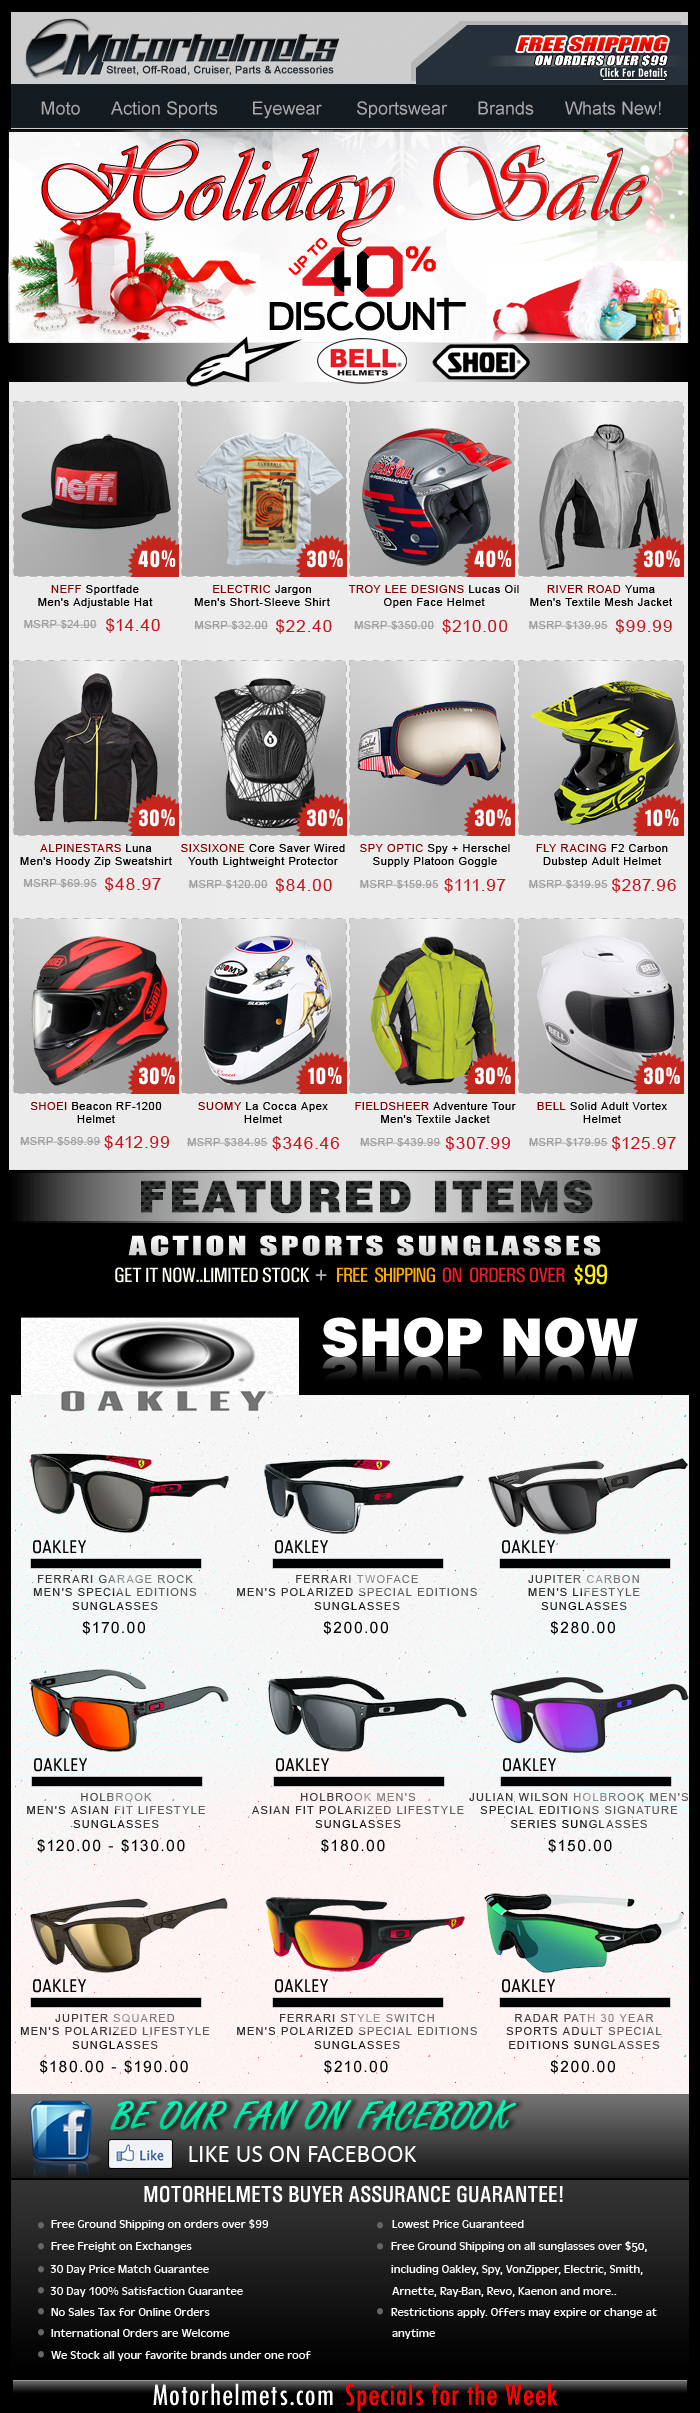 Holiday SALE continues...Up to 40% off on Astars, Bell, Shoei and more!